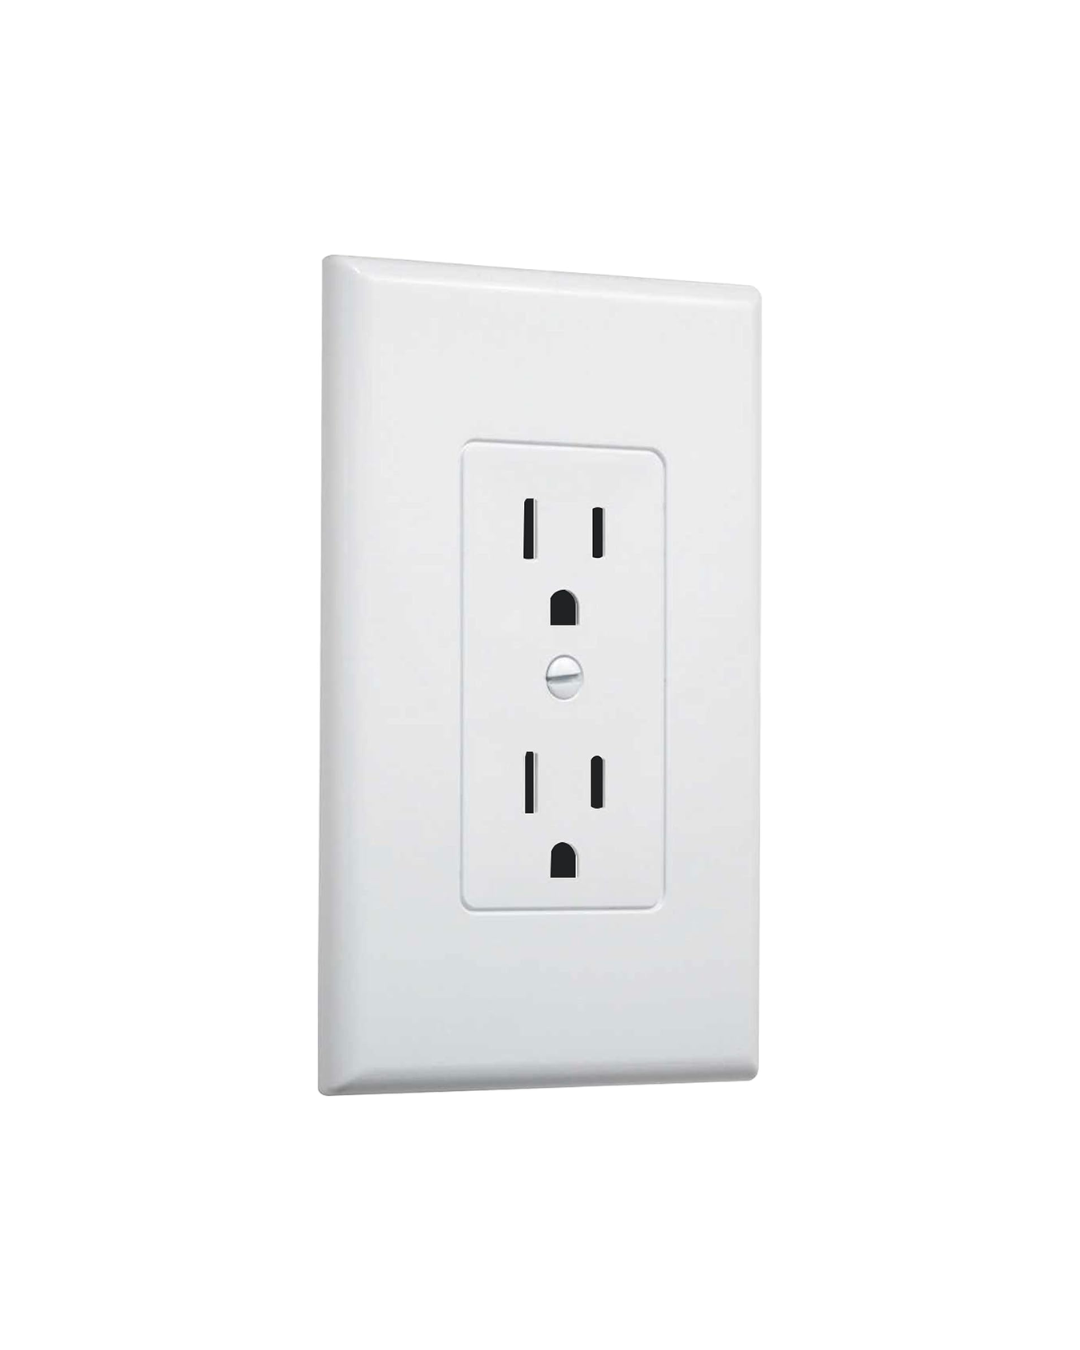 wall plate cover, electrical outlet cover, plug